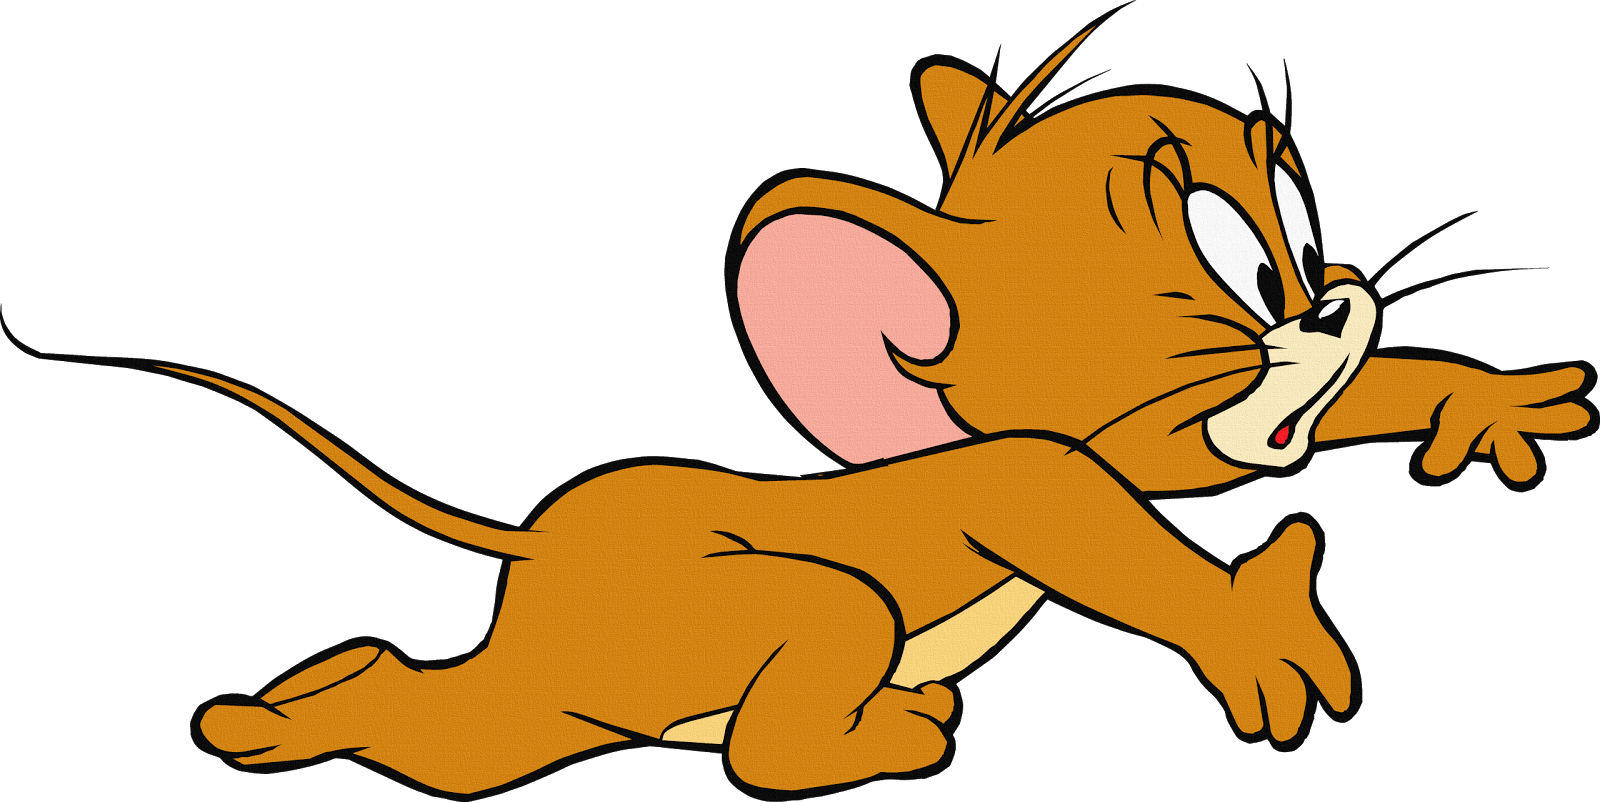 Tom And Jerry Cartoon Characters - Tom And Jerry Render.